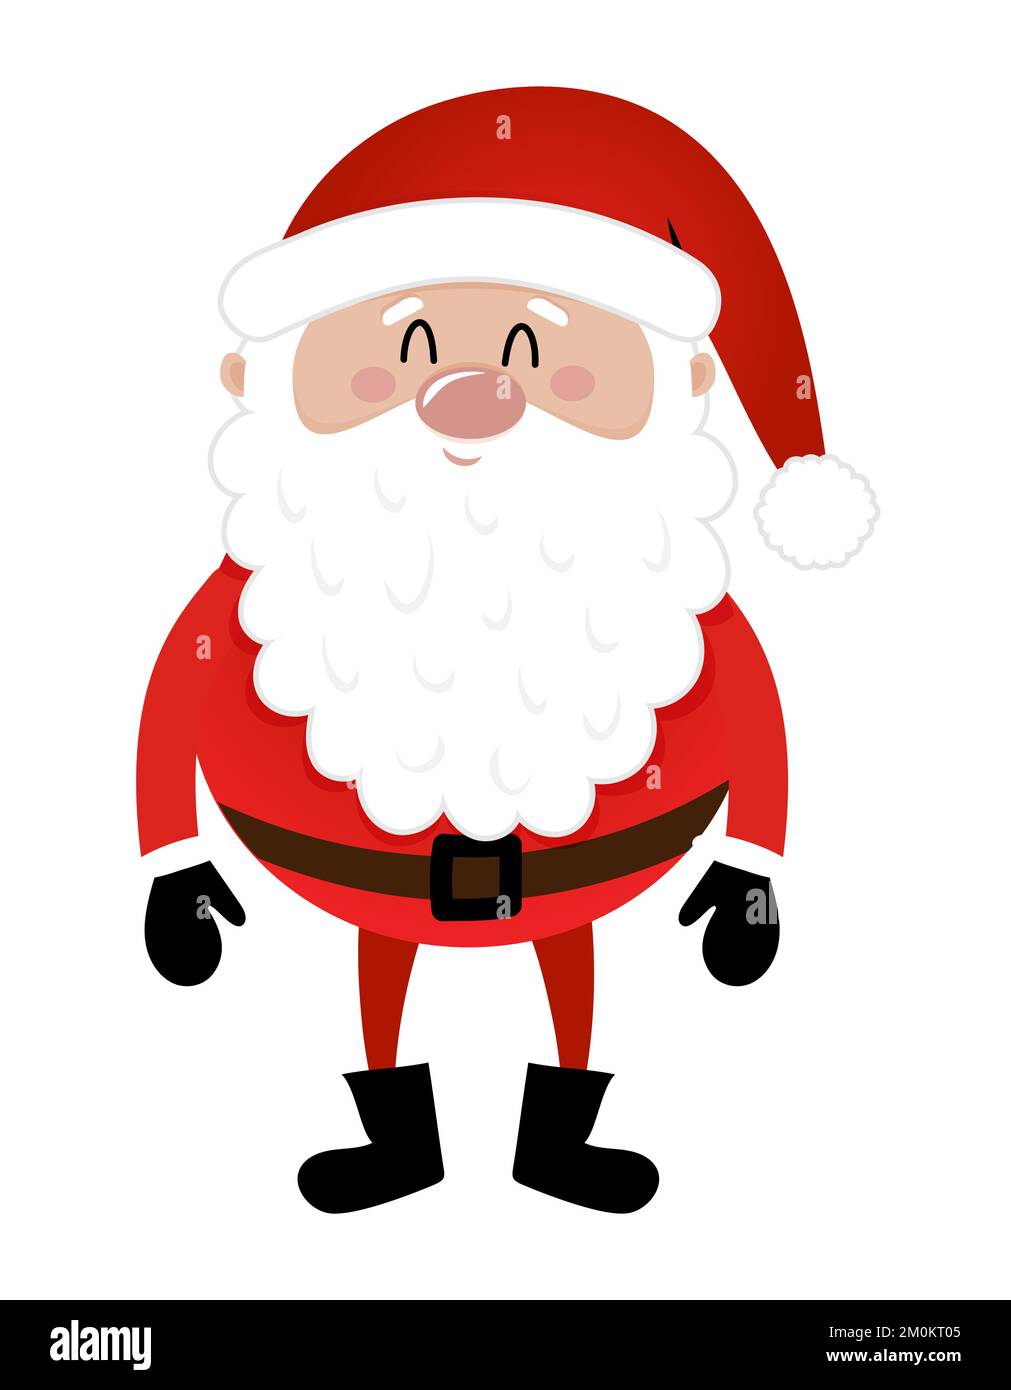 Standing Santa - illustration in cartoon style. Merry Christmas and happy new year. Funny characters in Santa's workshop. Stock Vector